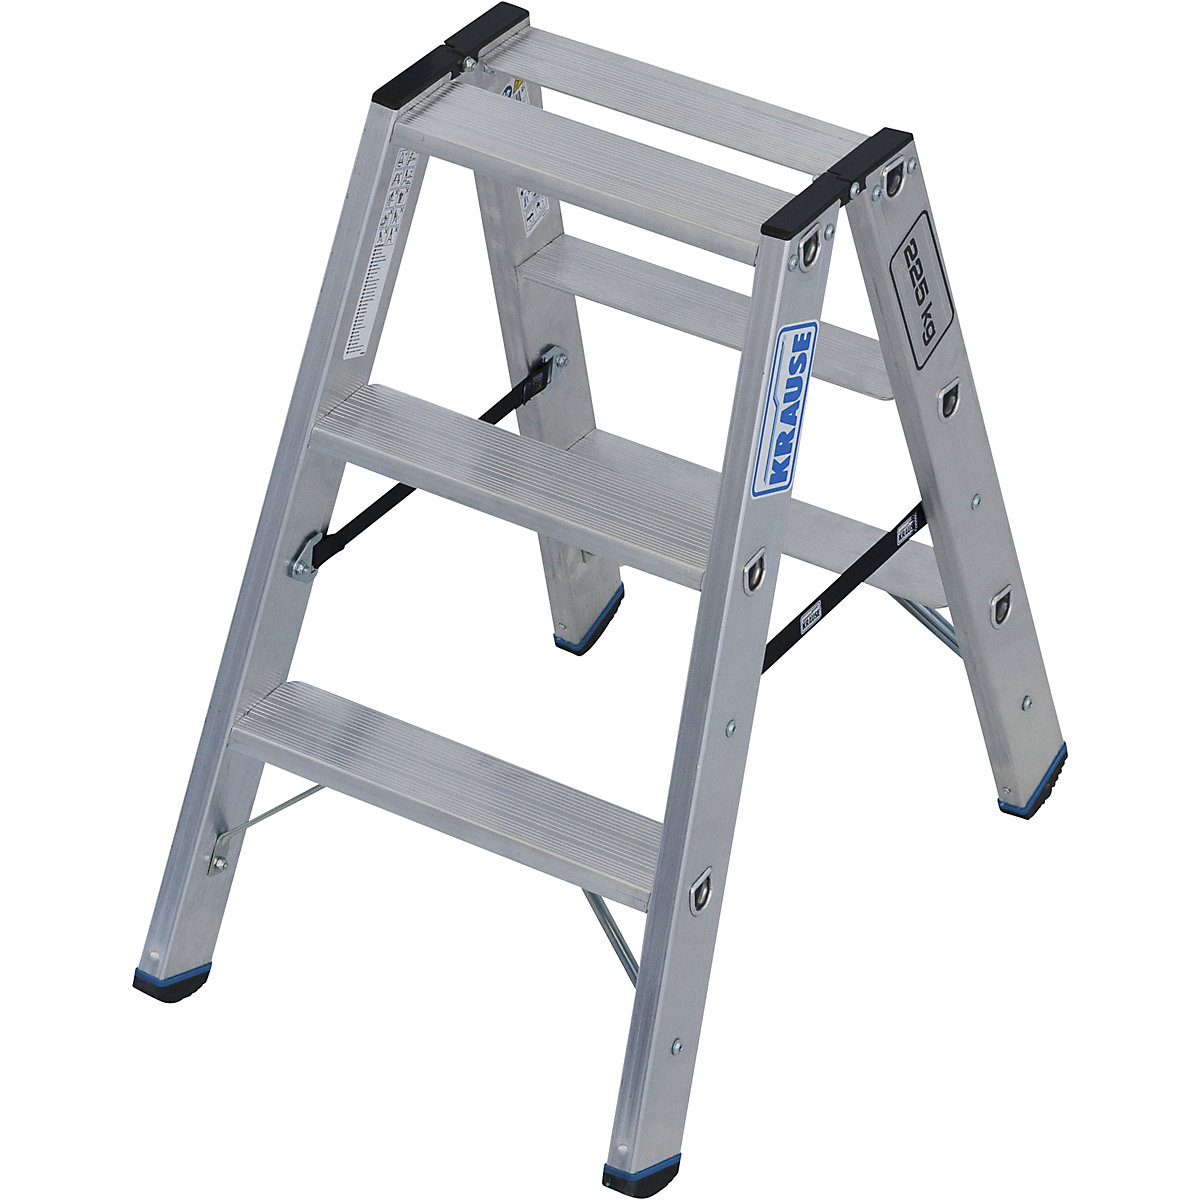 Heavy duty step ladder – KRAUSE, double sided access, up to 225 kg, 2x3 steps-4